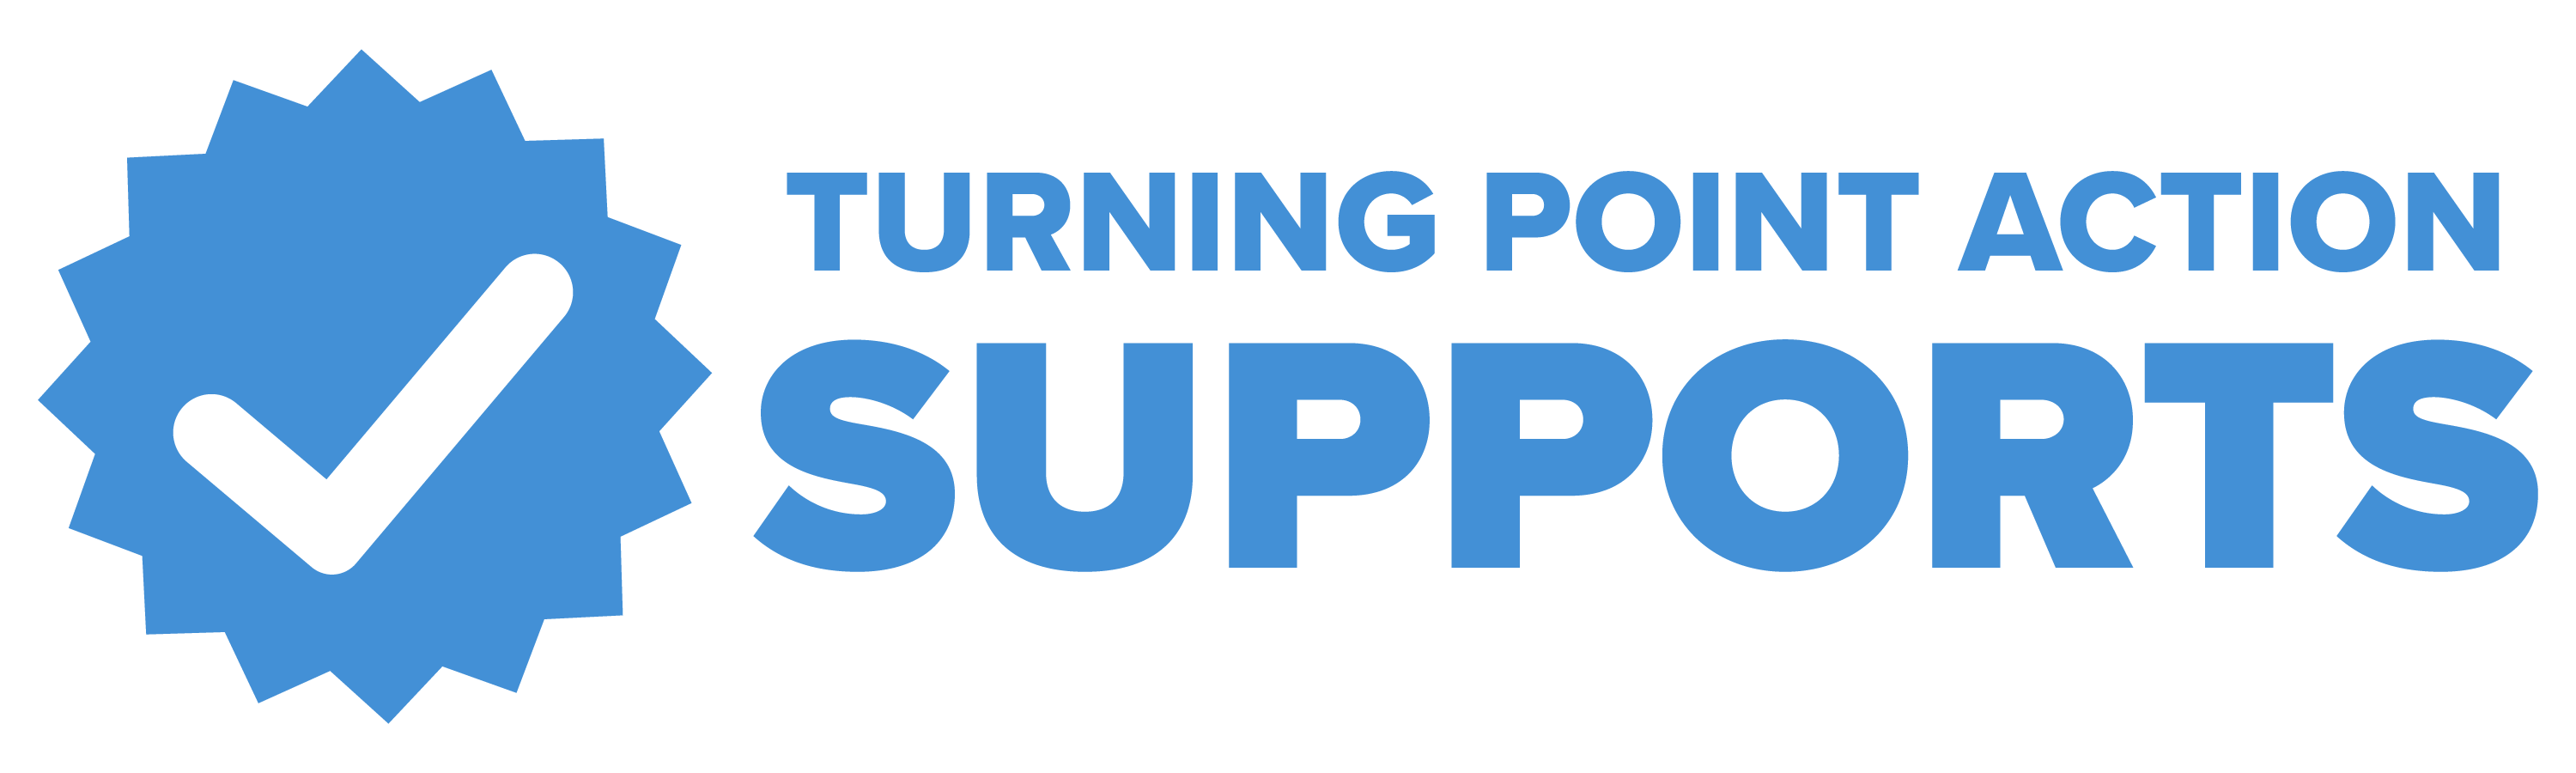 Turning Point Action Supports